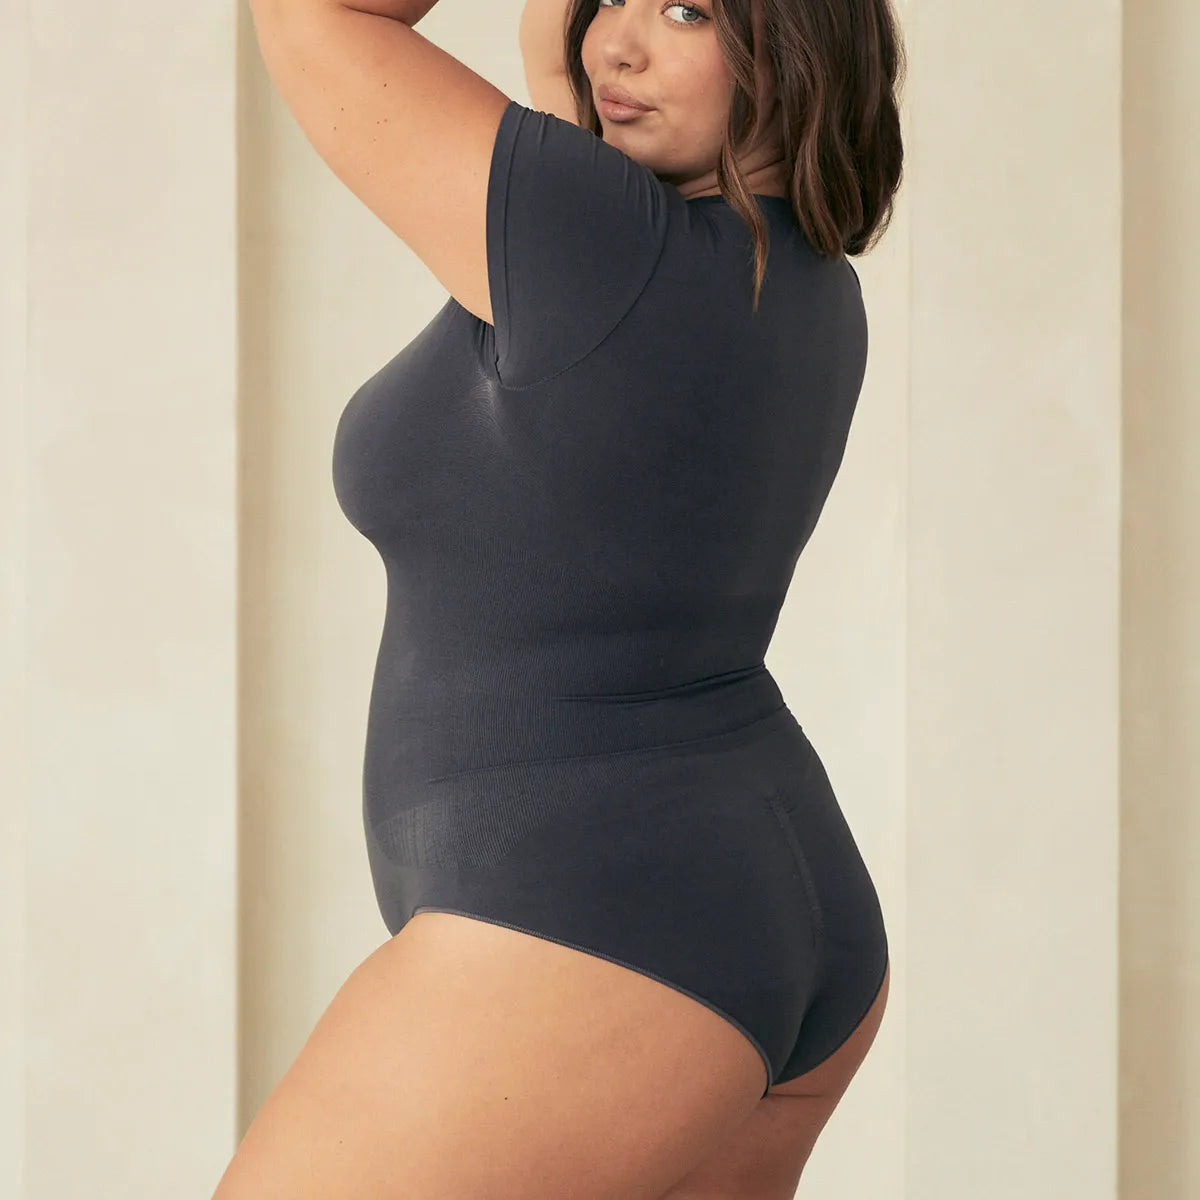 Choose Quality Today!!! Anika Summer Short Sleeveless Tight Shapewear  Bodysuit Top is the quality worth every penny. Here's why you NE